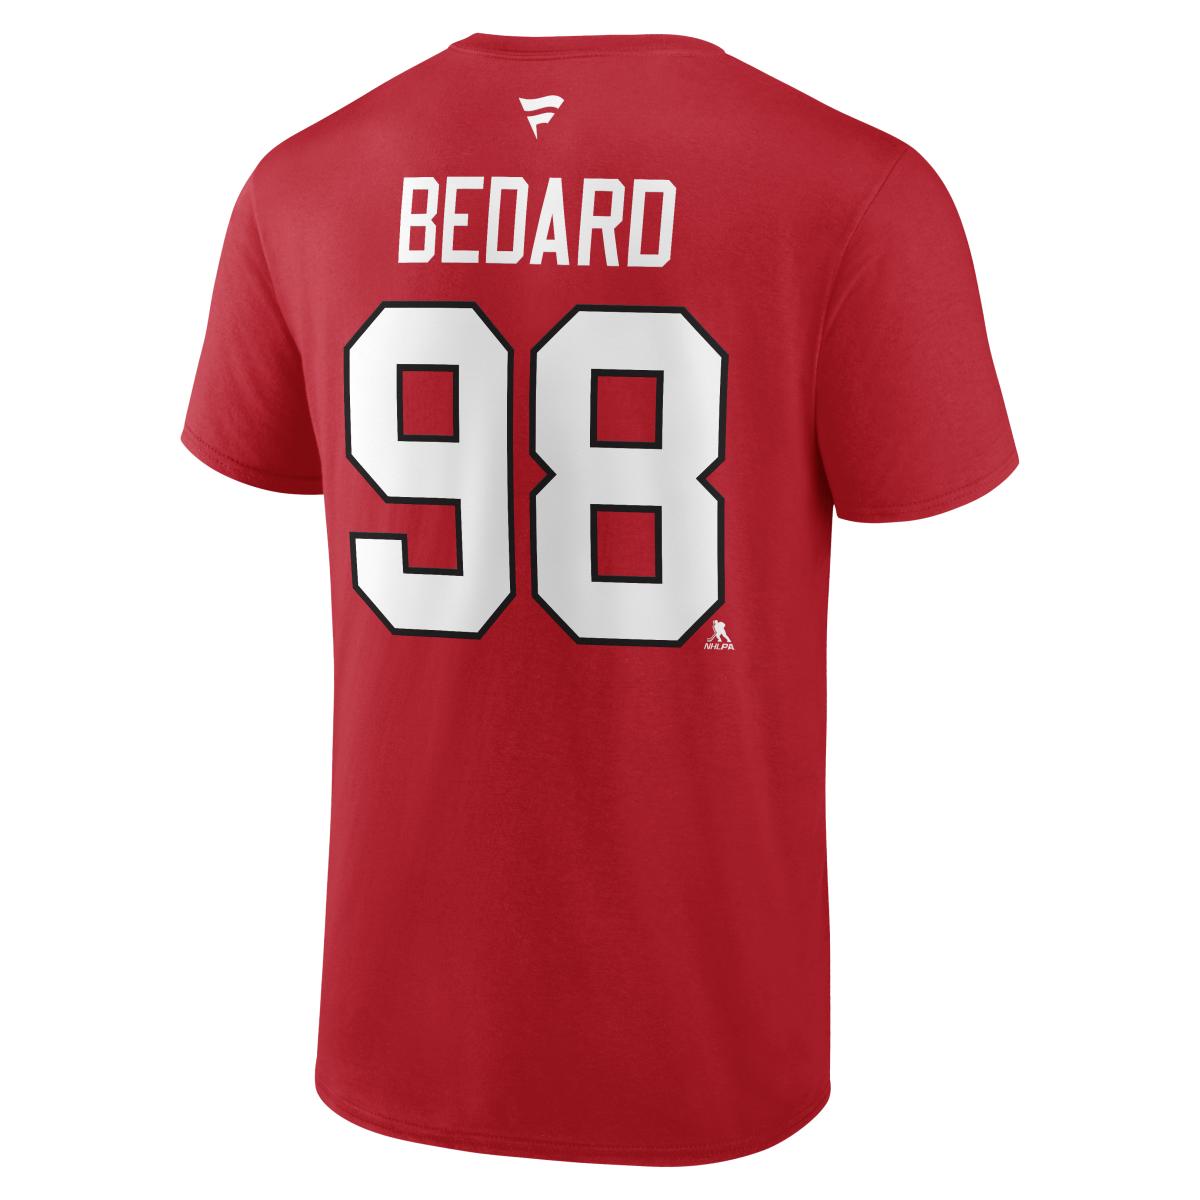 Bedard Men's Authentic Stack SS Red Tee - $34.99